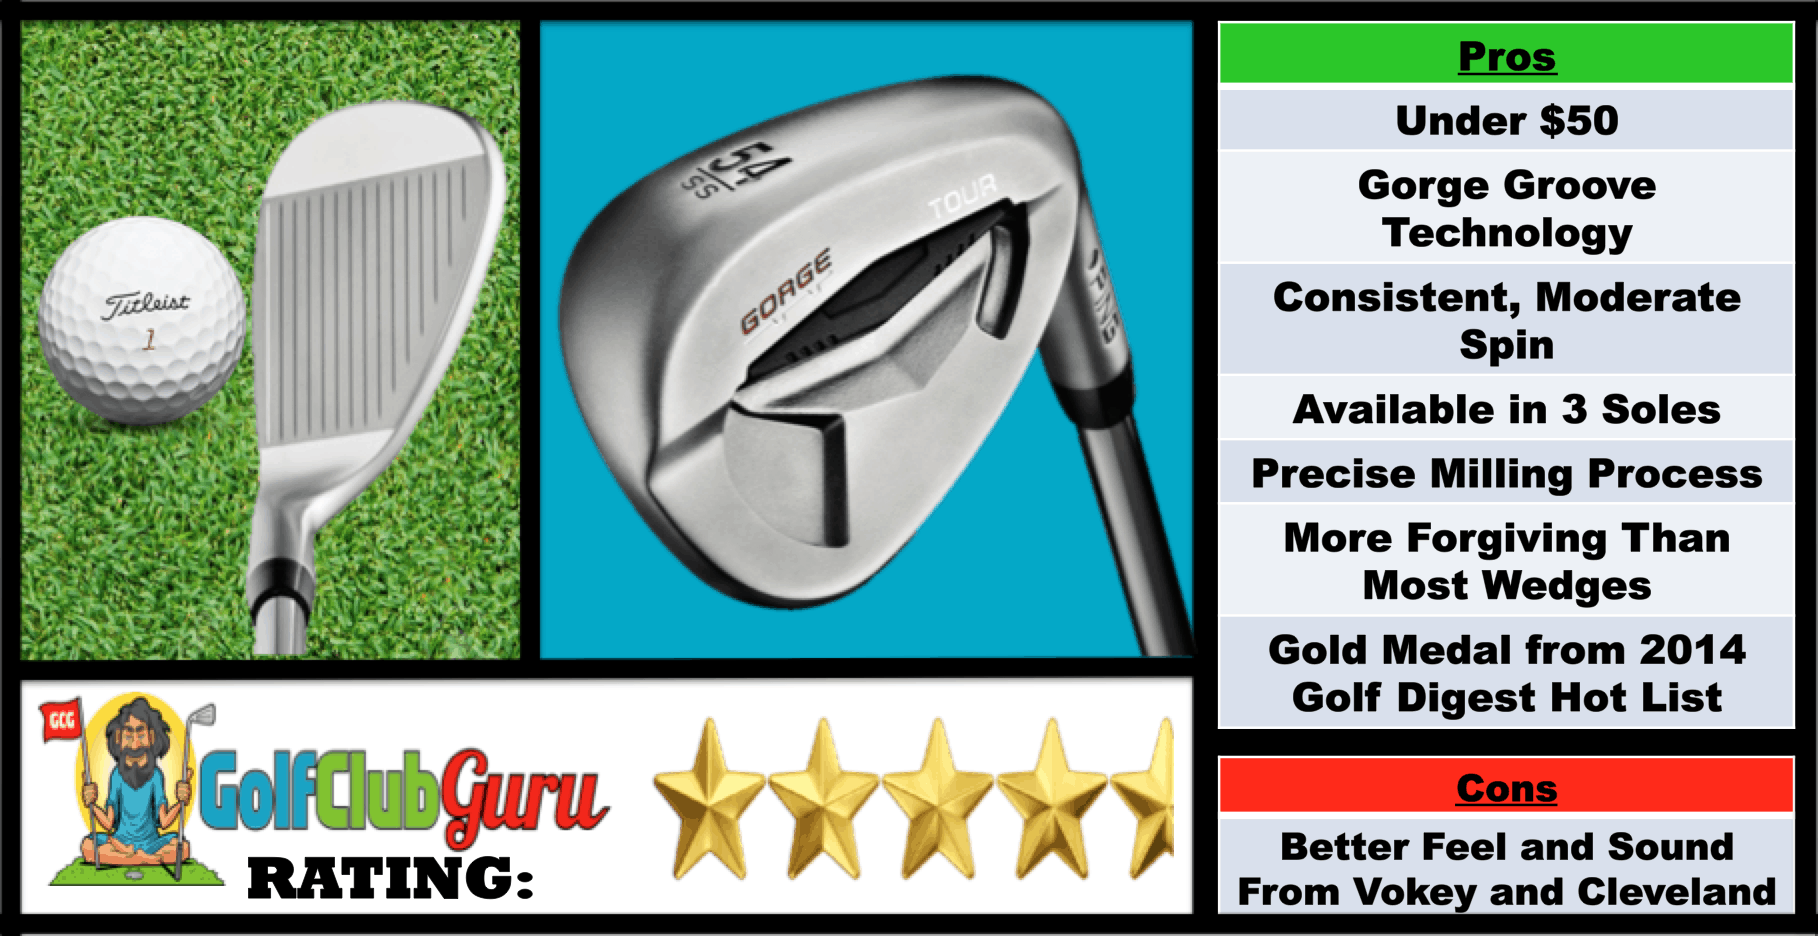 List of pros and cons of the Ping Gorge golf wedge, and pictures of the address position and in the bag view.